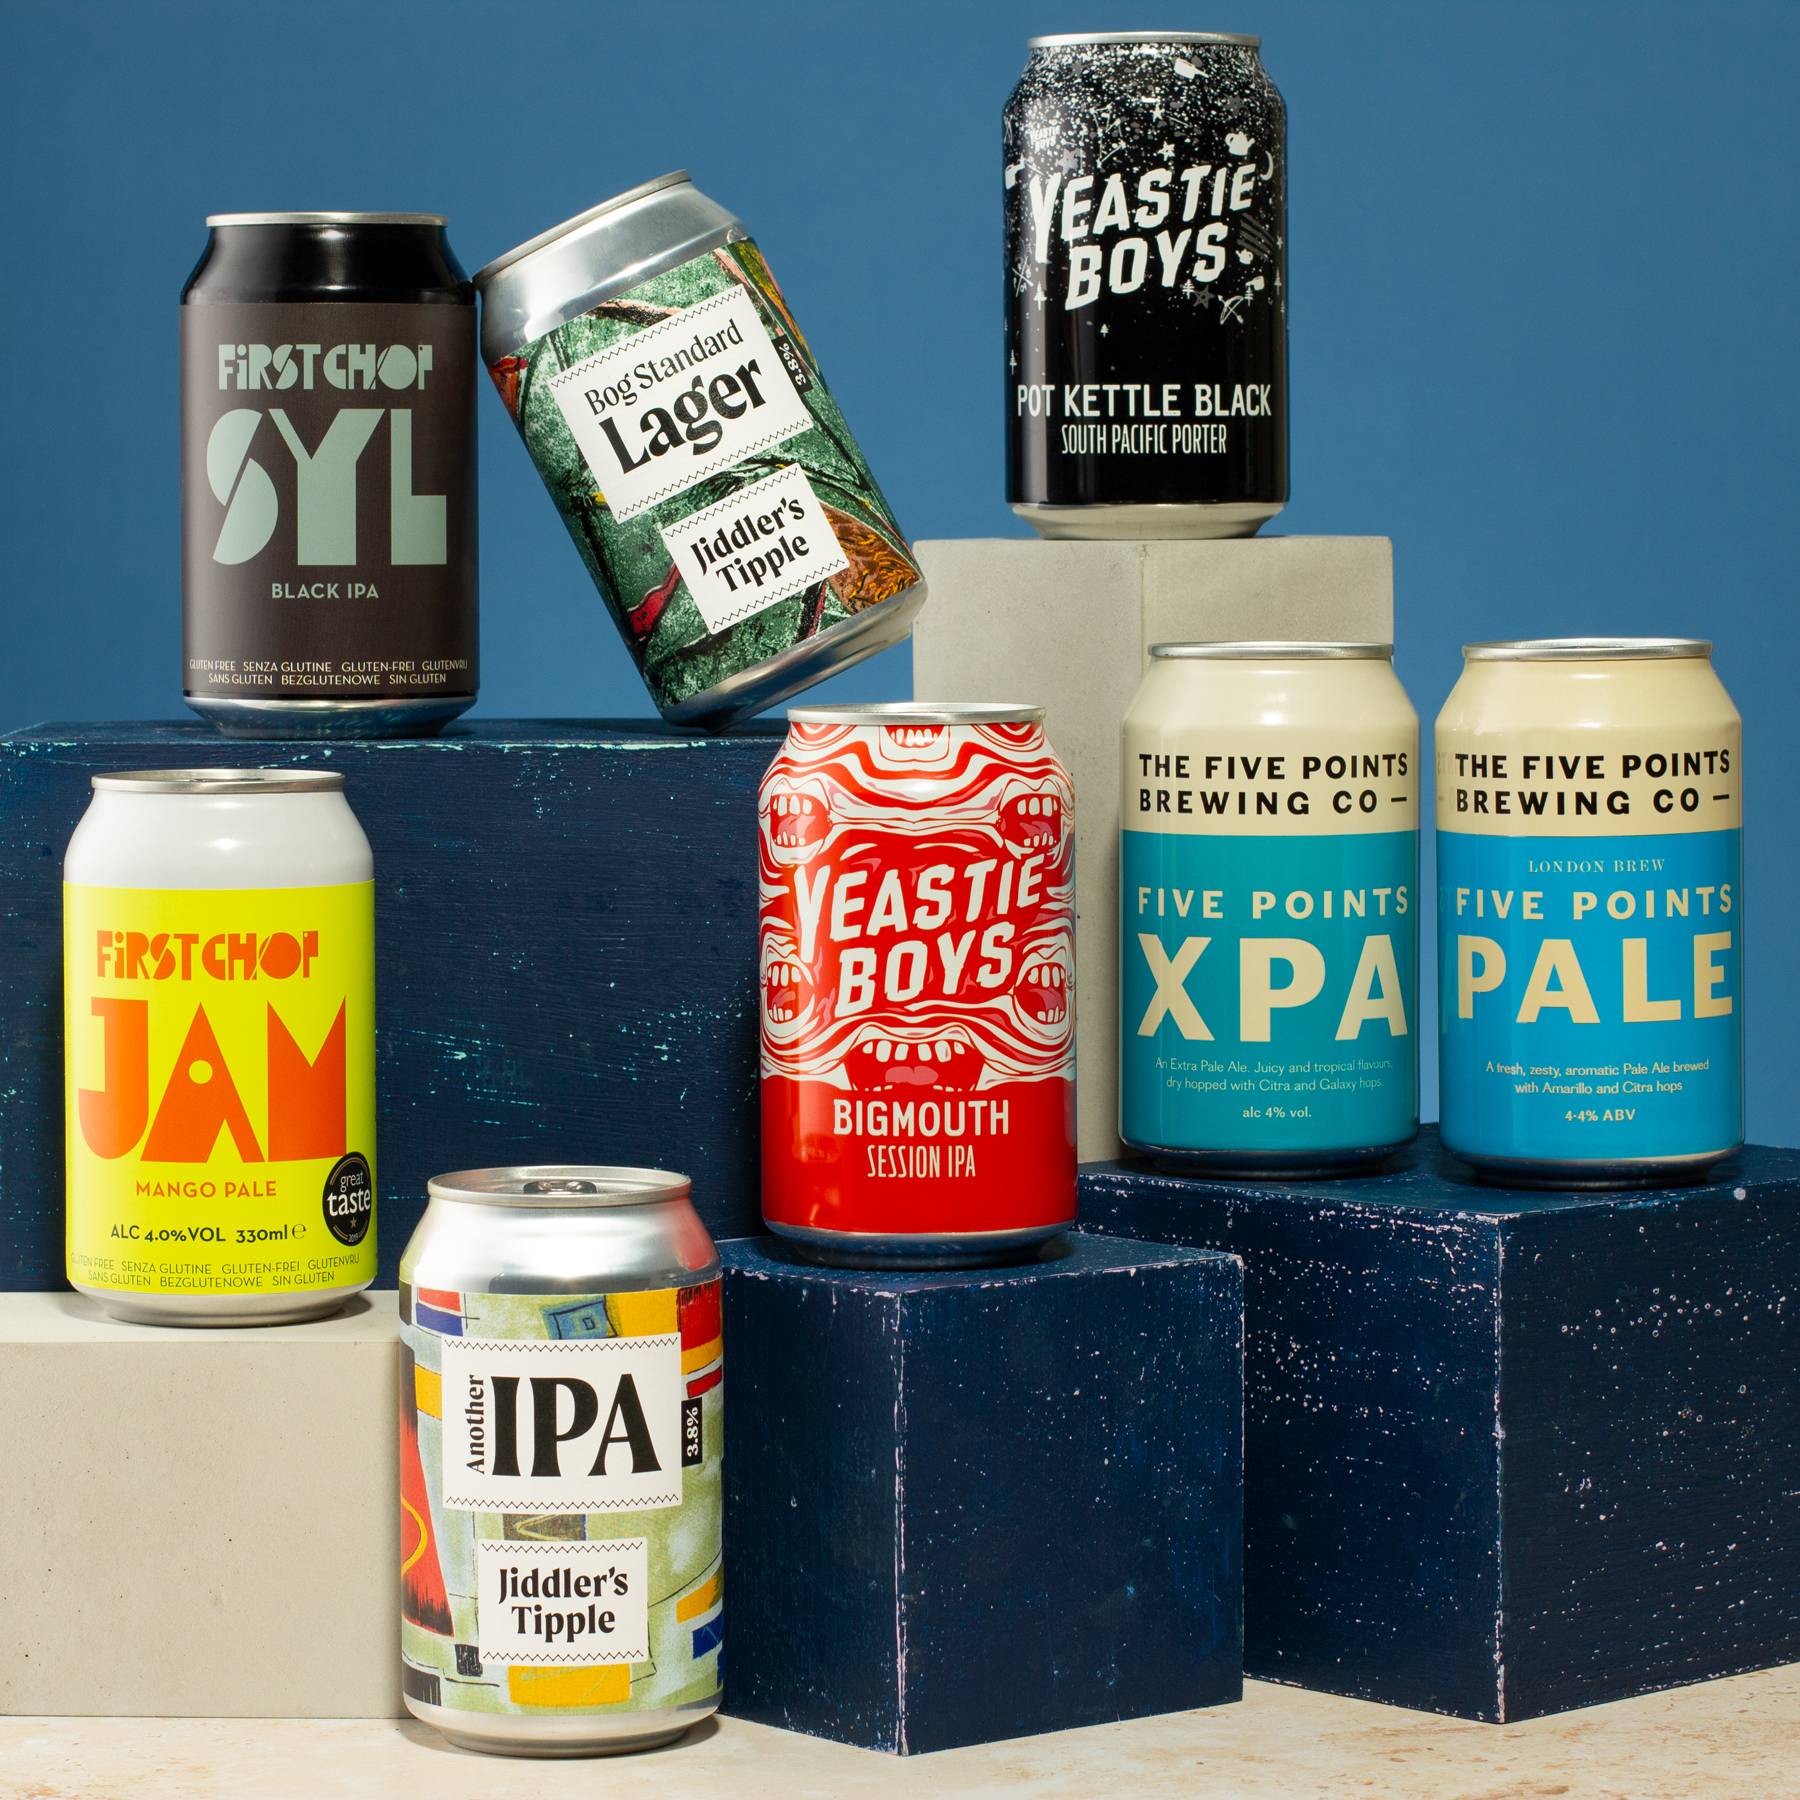 Selection of eight beer cans included in the hamper from BoroughBox